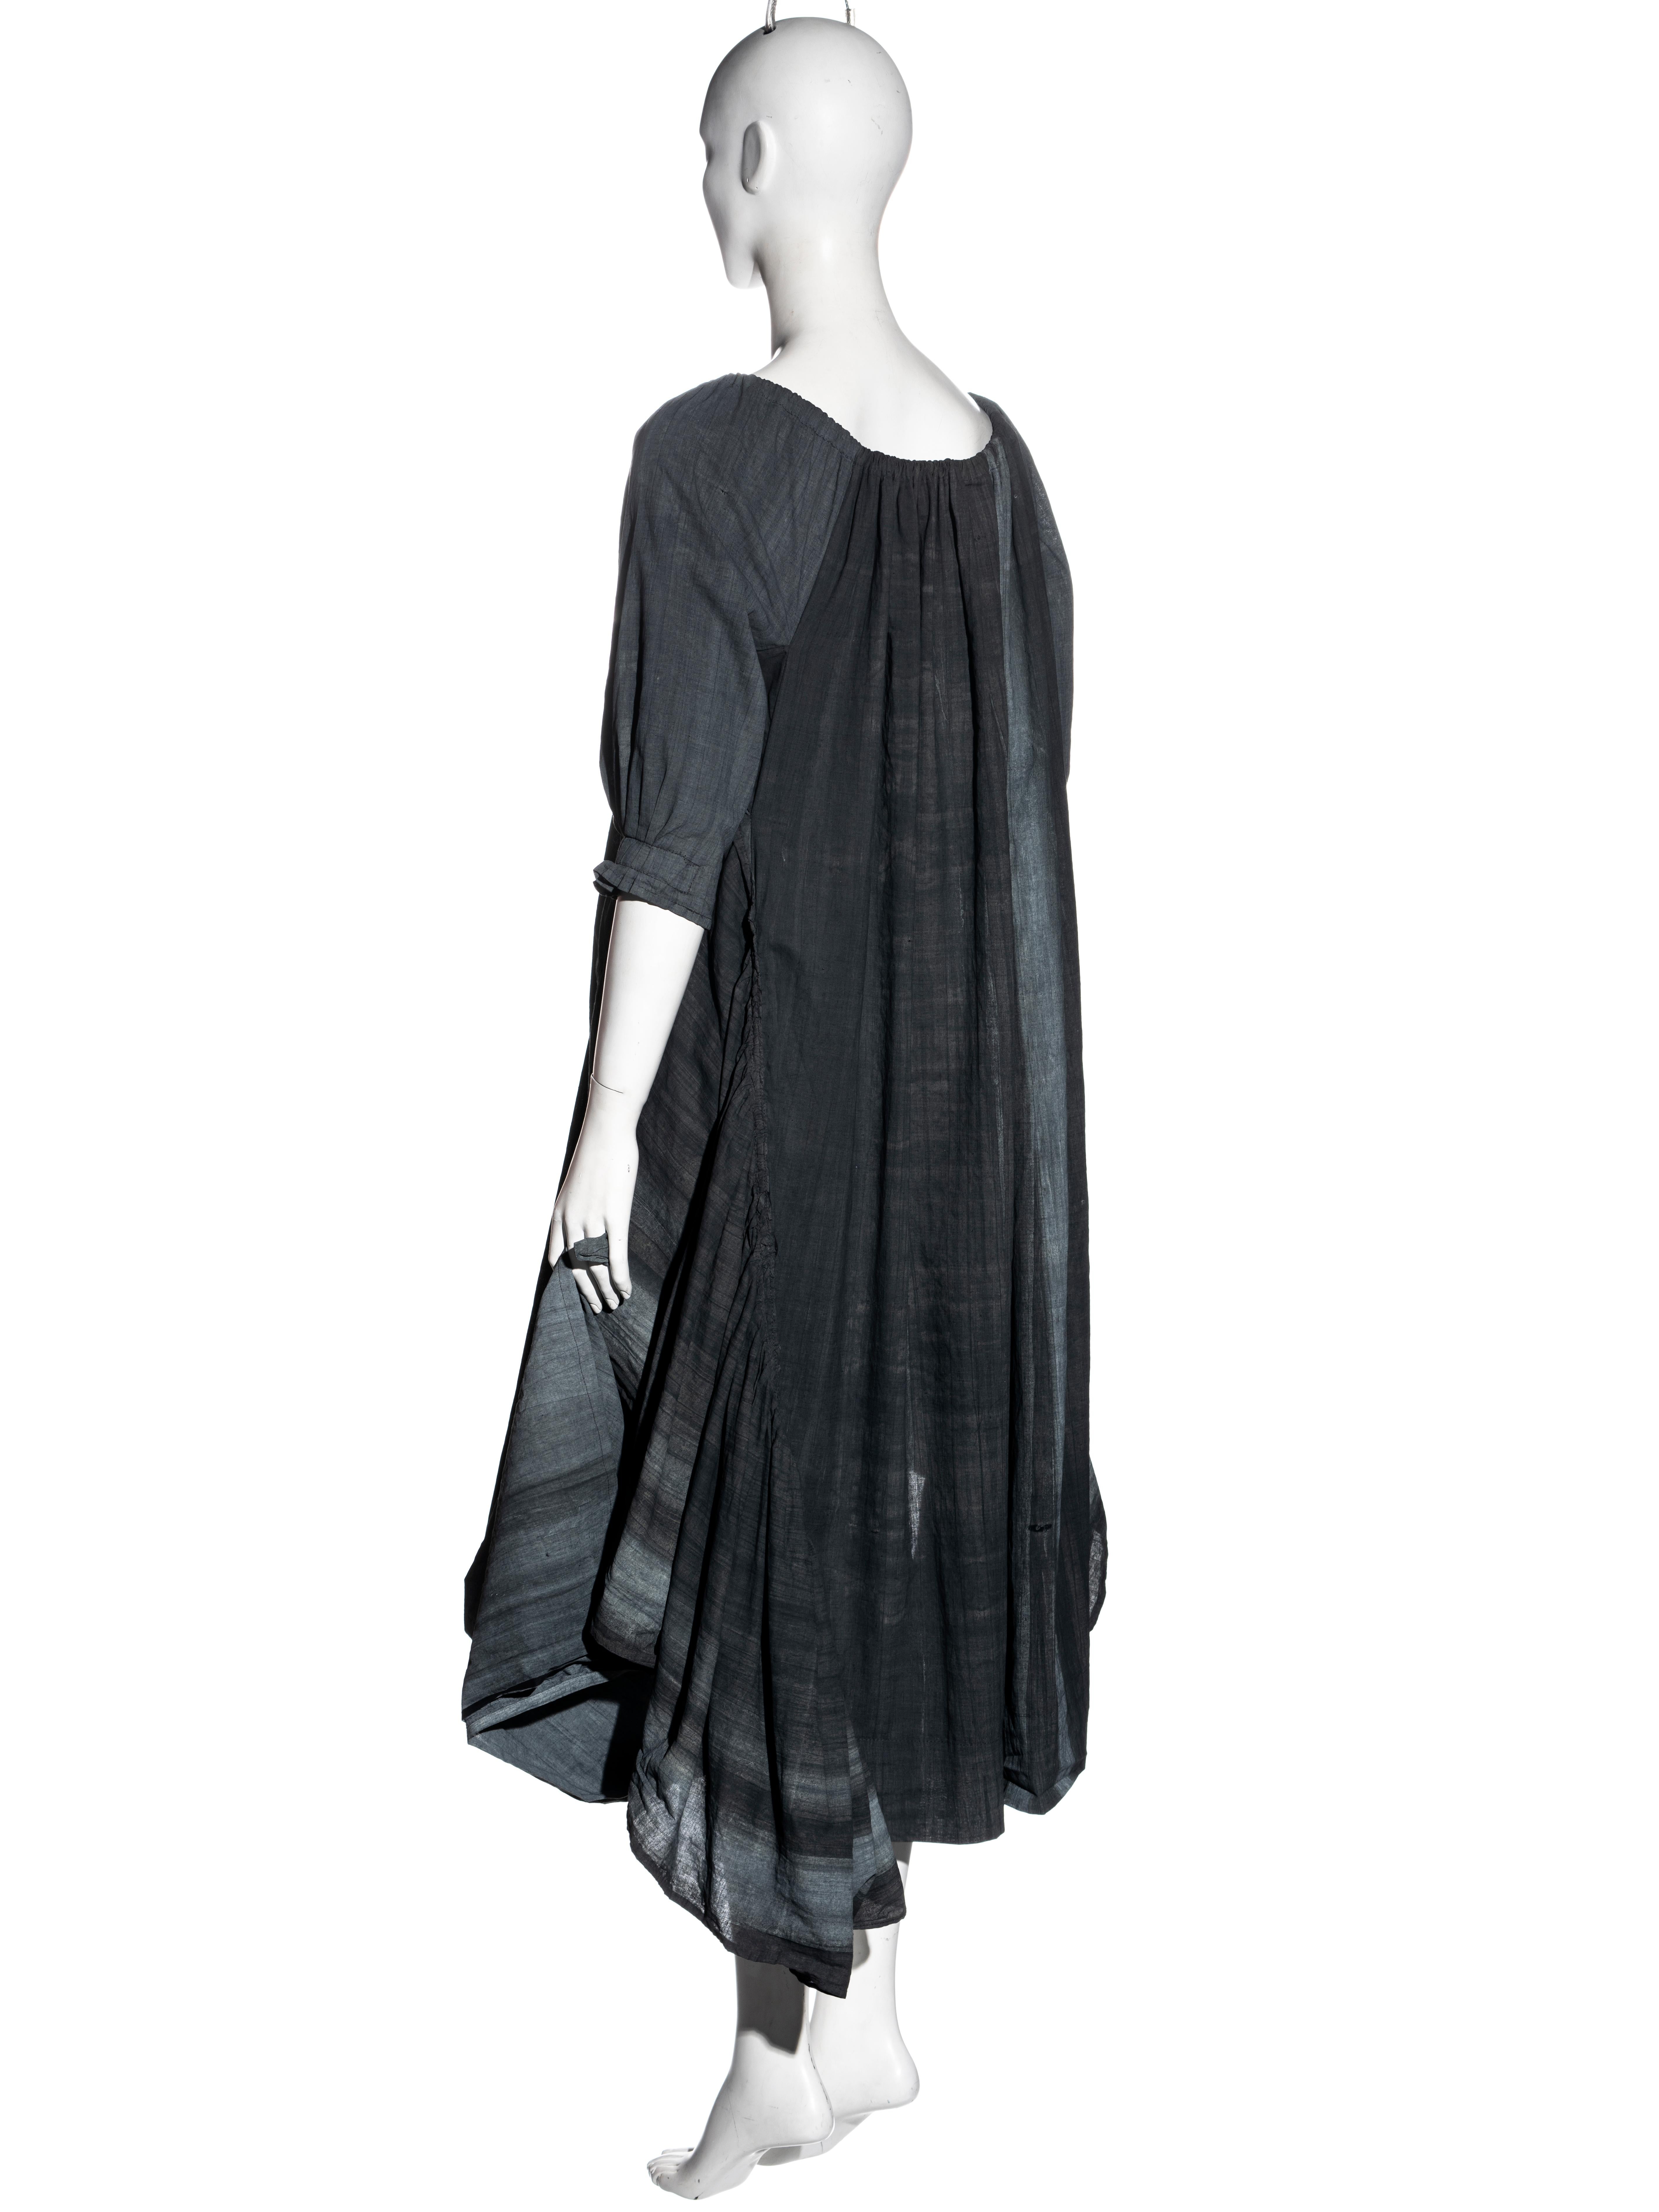 Worlds End by Vivienne Westwood and Malcolm McLaren grey smock dress, ss 1983 For Sale 4